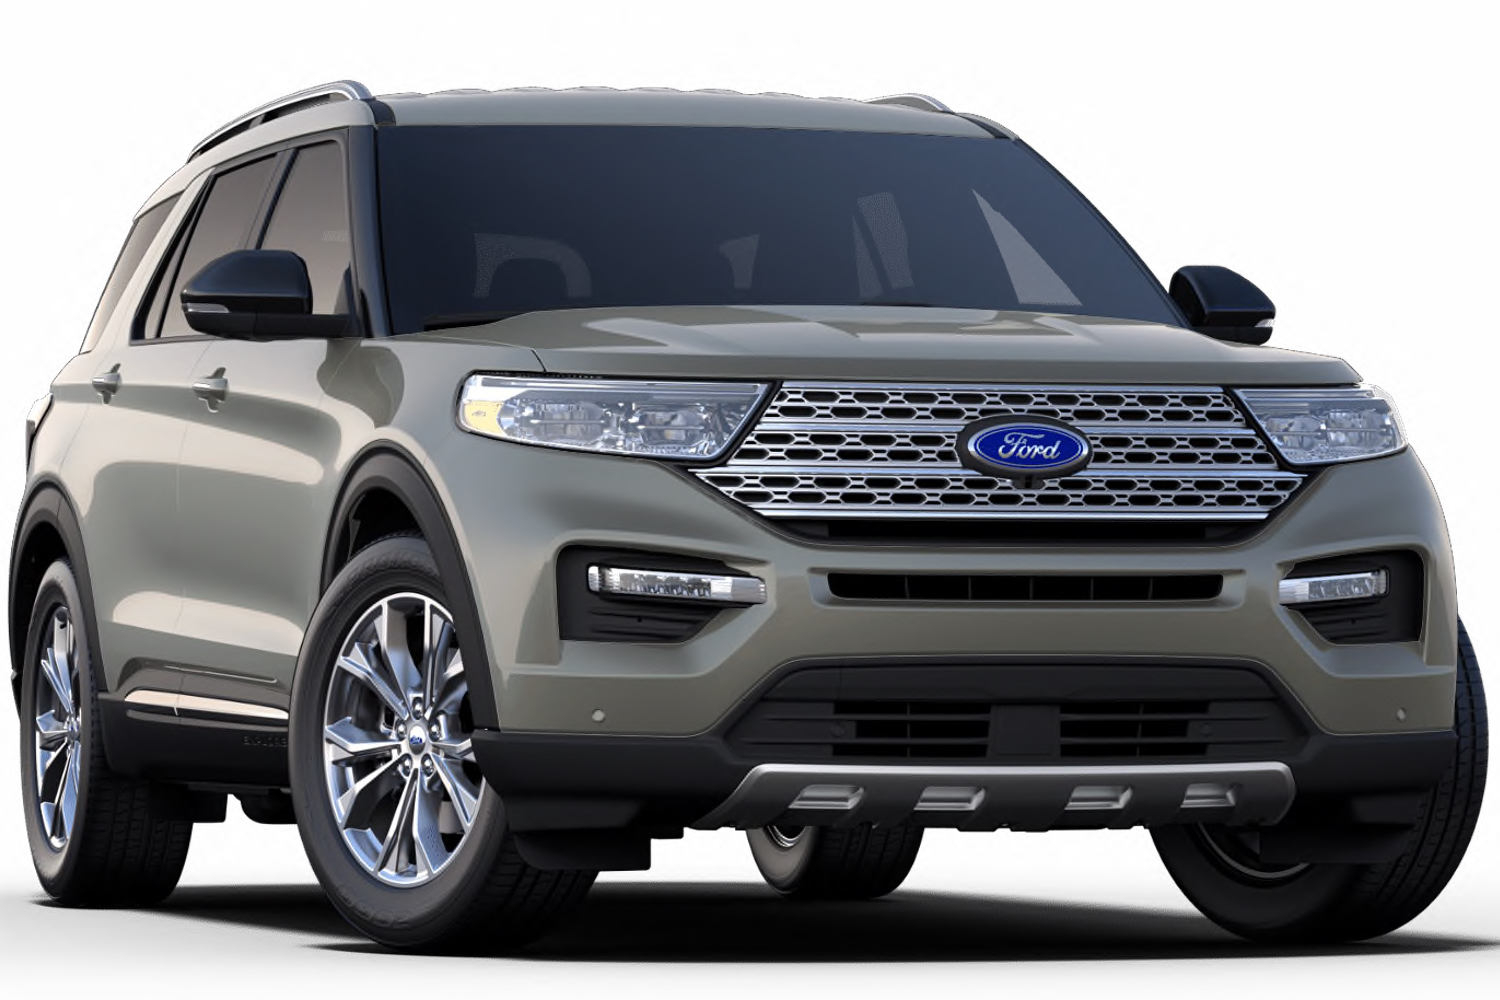 2020 Ford Explorer Silver Spruce Metallic Color First Look